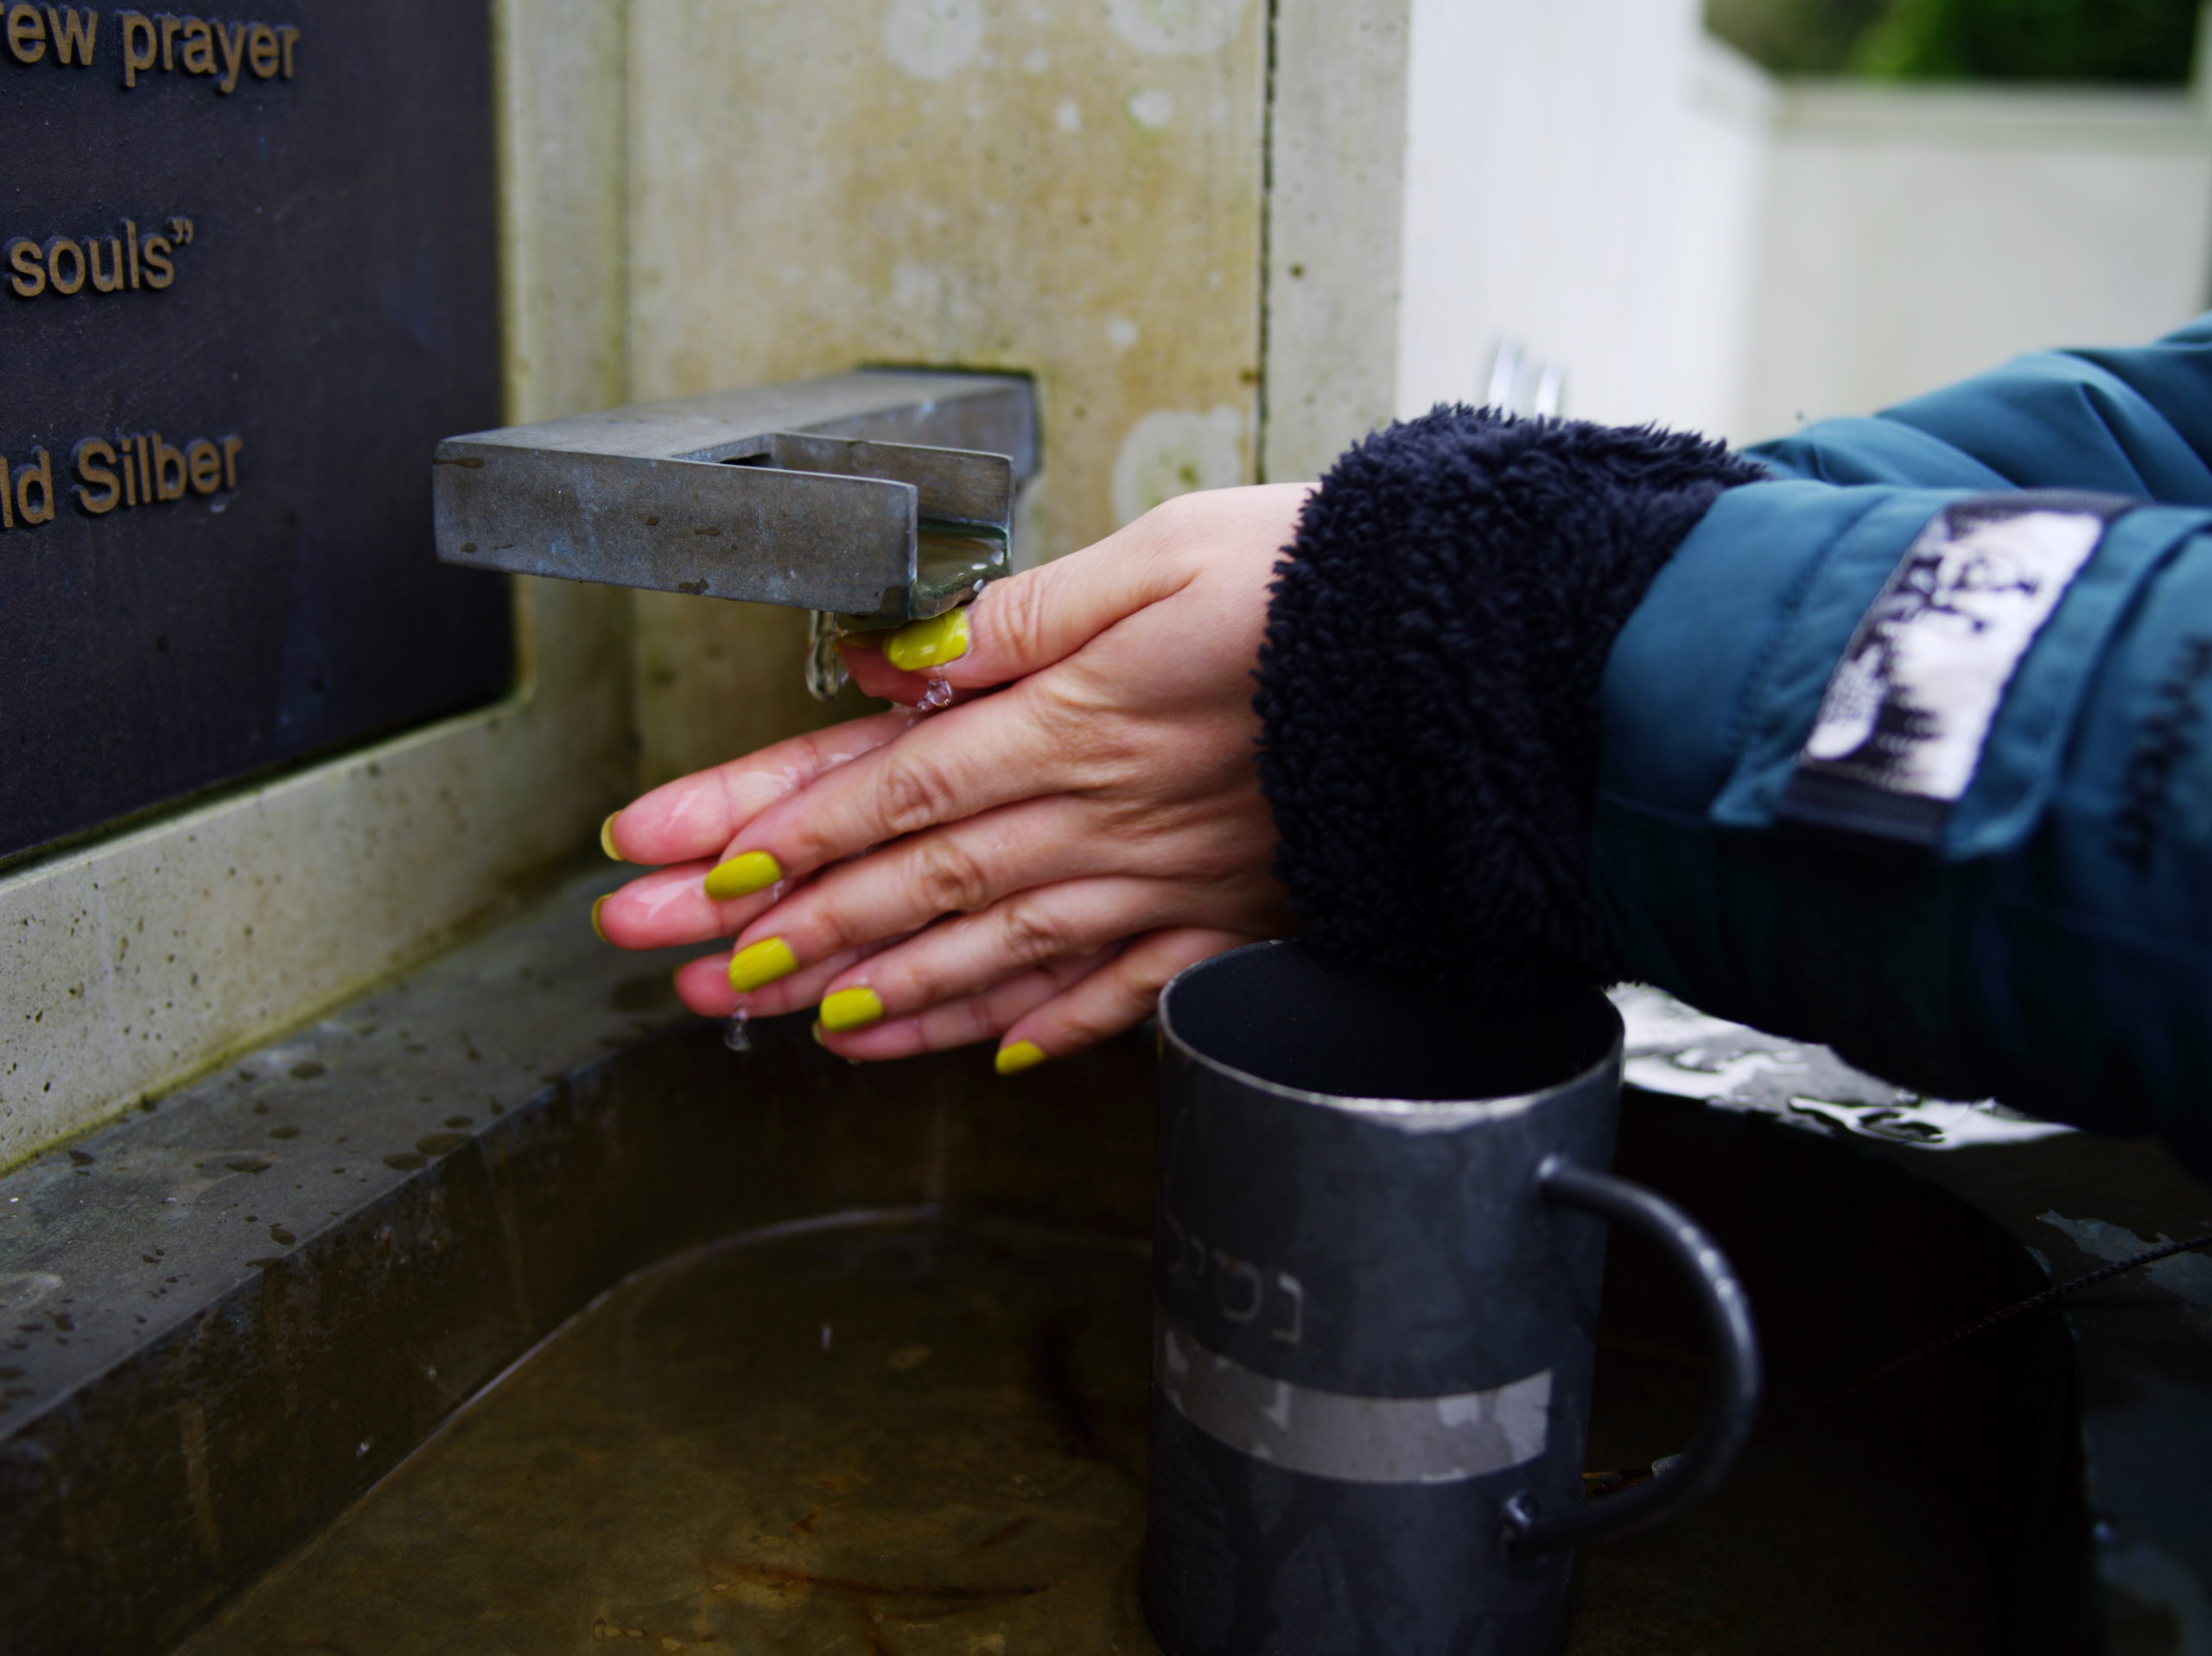 Image Description: Two hands with bright neon nail polish are washed with running water from the metal Ritual Basin. The stream of water is trickling out of a thin rectangular pipe with a 90 bend. A metal cup with Hebrew writing is sitting in the basin, closer to the camera than the two washing hands. The cup has a clip on the bottom attached with a thin metal safety wire.